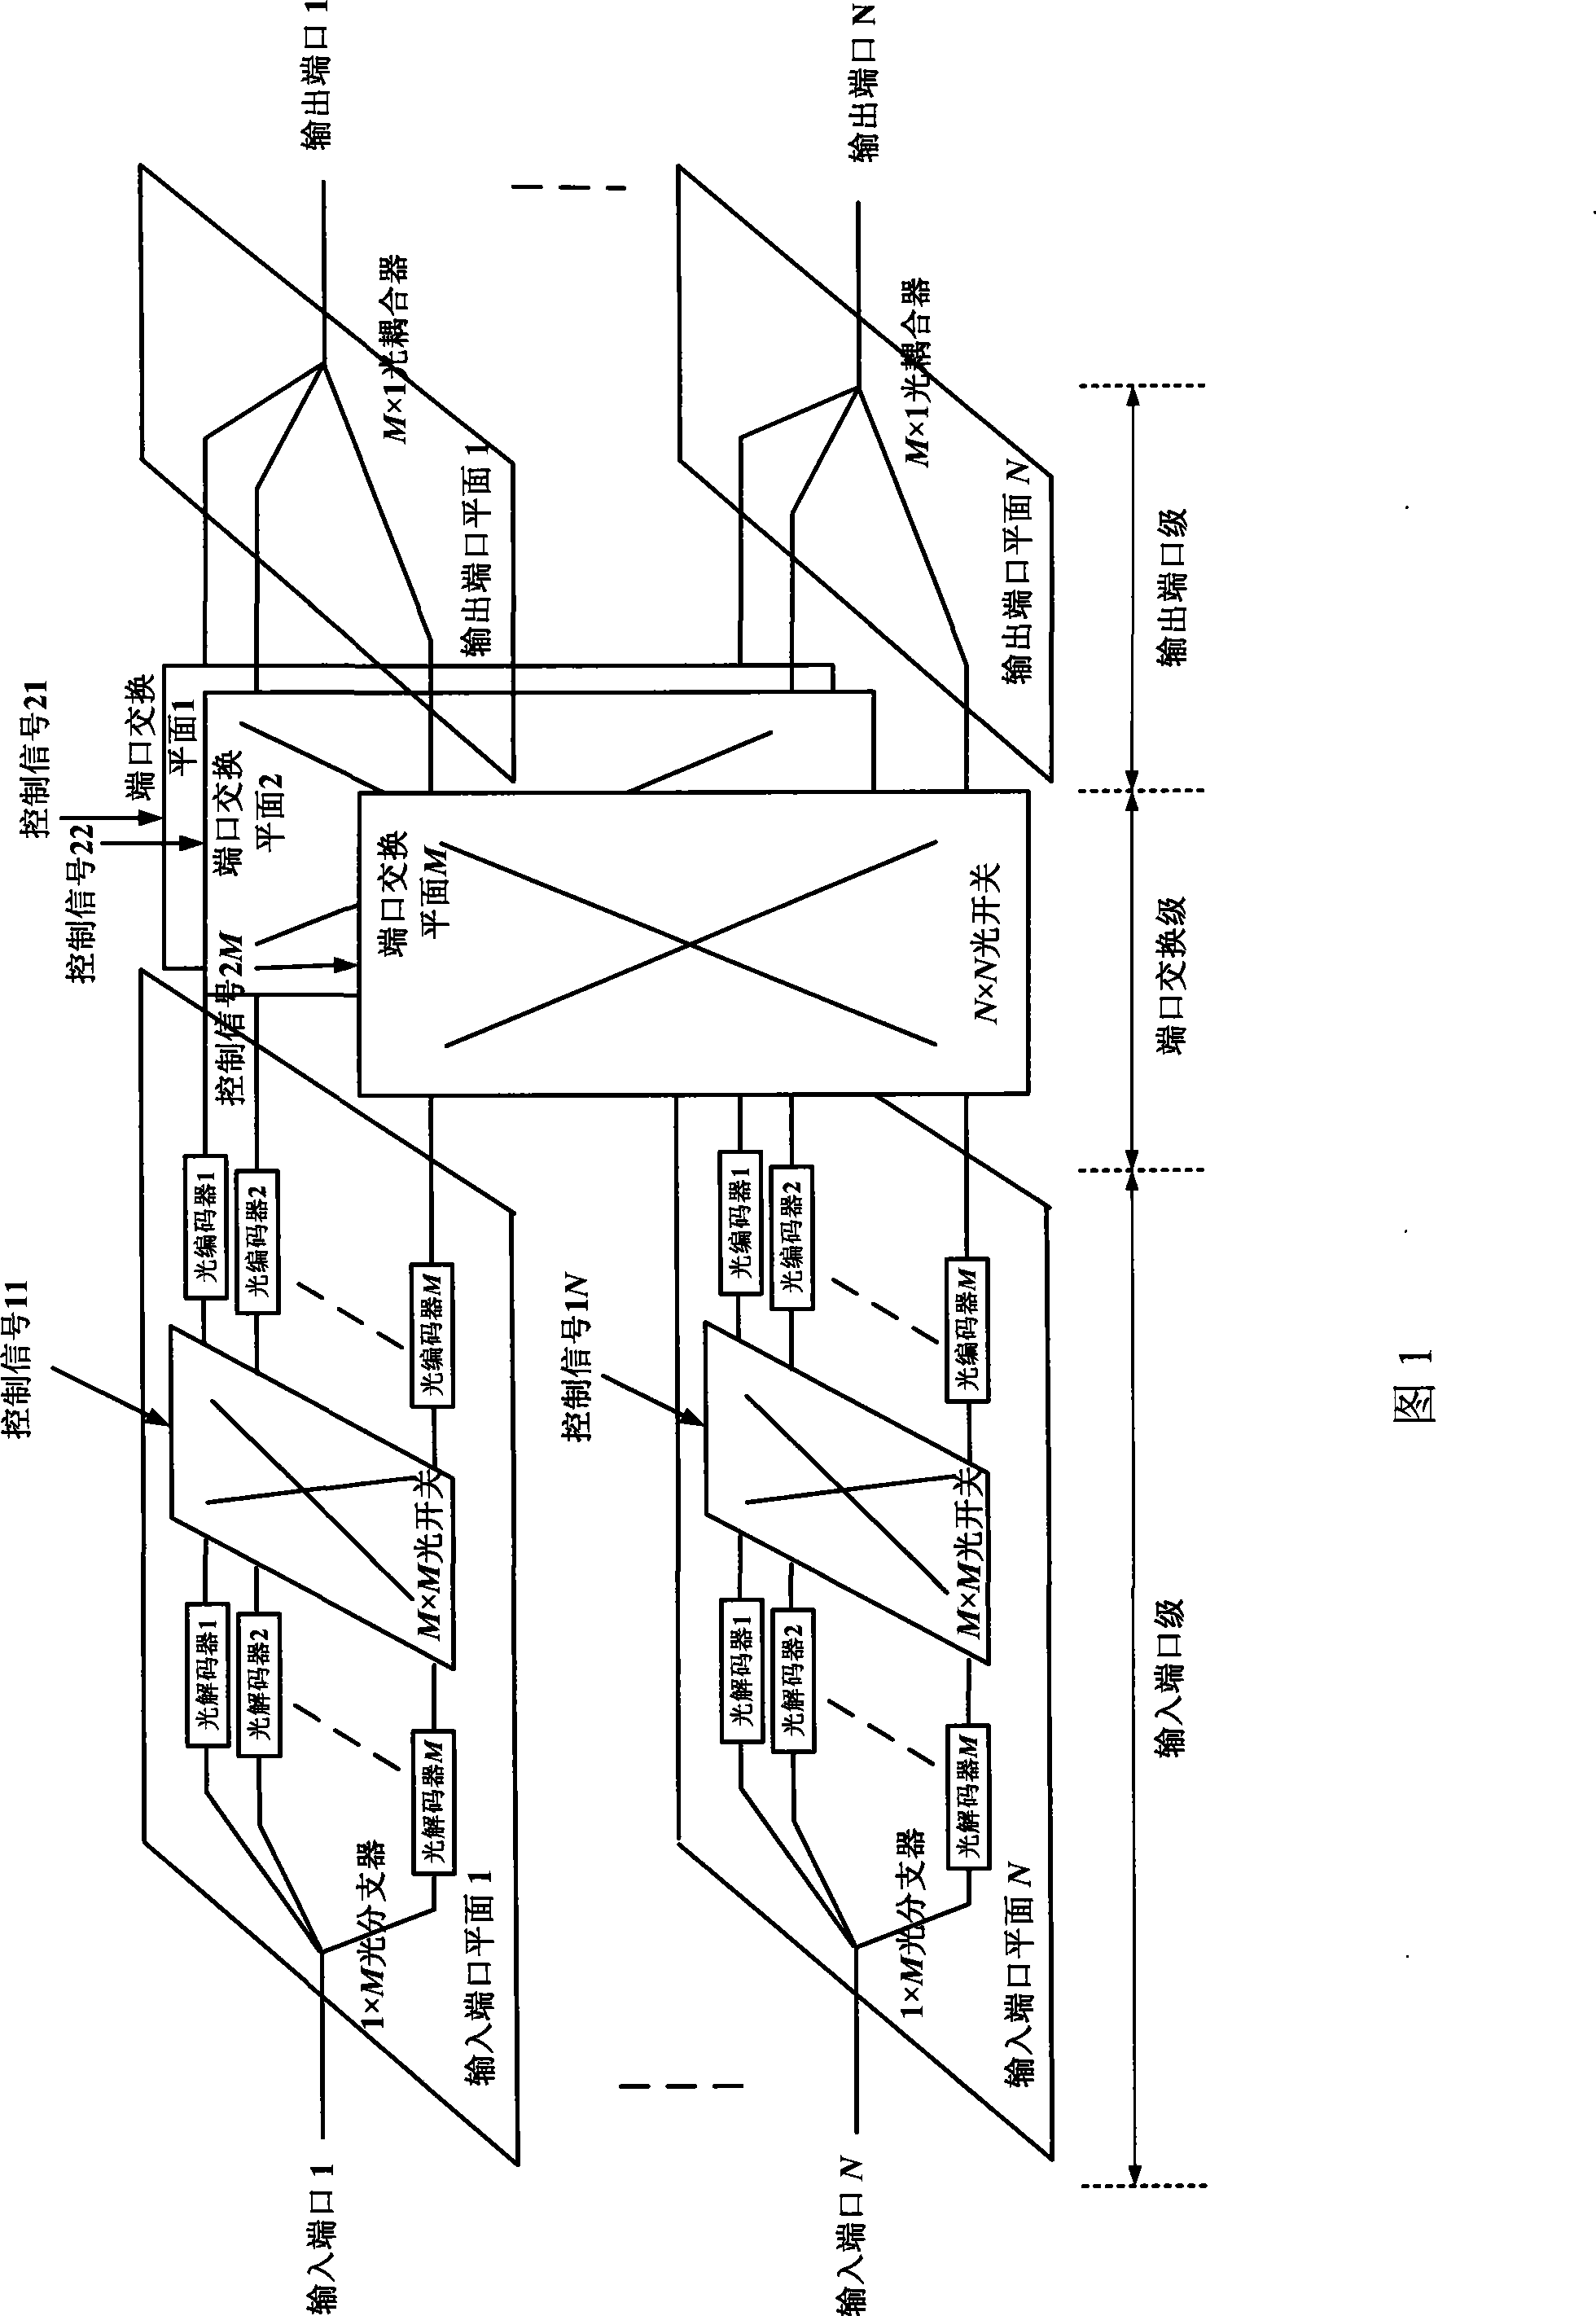 Light packet switching structure based on light code division multiplexing